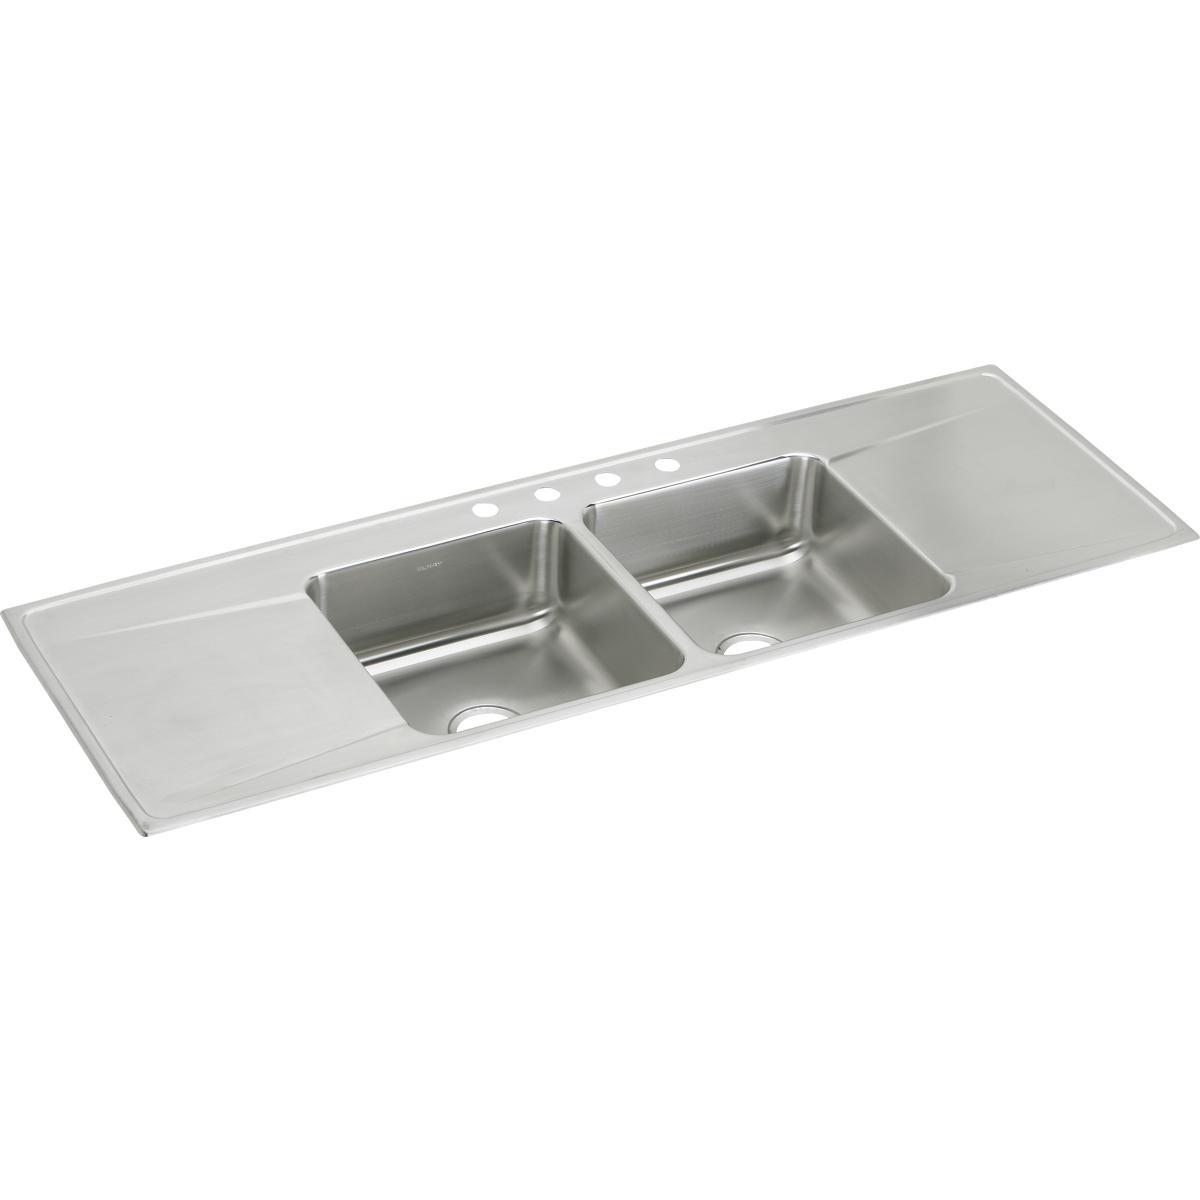 Elkay Lustertone Classic 66" x 22" x 7-5/8" Equal Double Bowl Drop-in Stainless Steel Sink with Drainboard